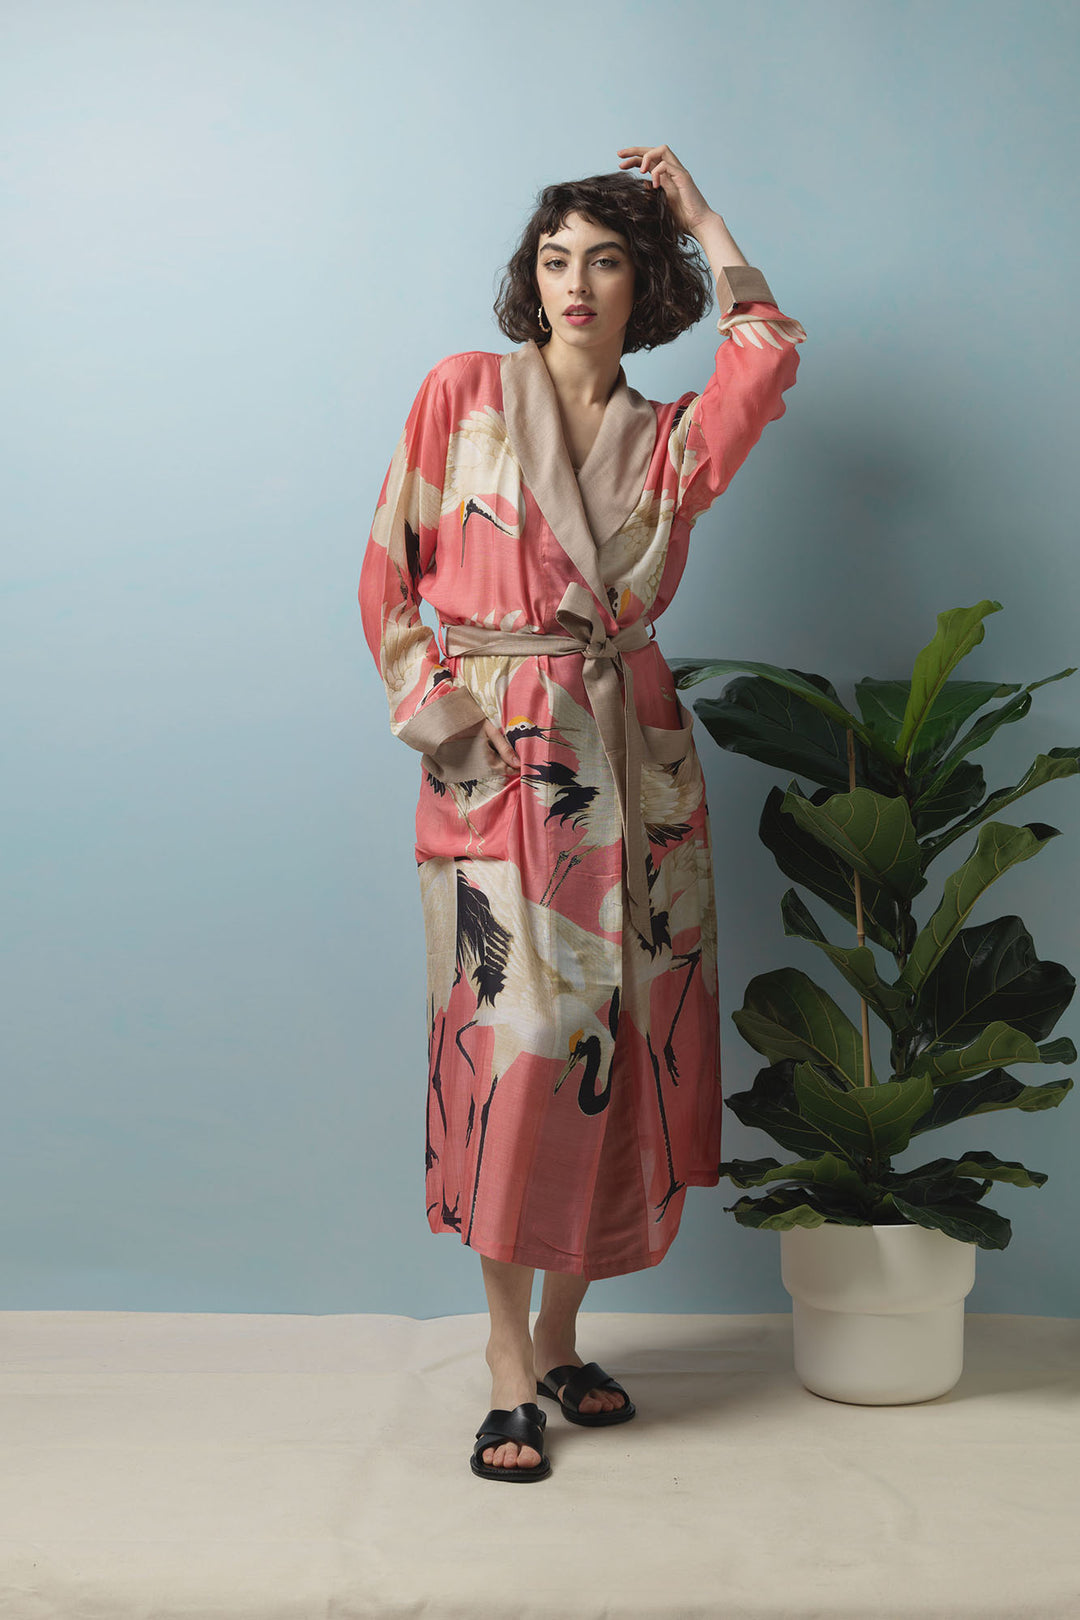 One Hundred Stars Stork Crane Lipstick Pink Gown - The Gown is made from a custom blend of modal and viscose which creates a silky smooth lightweight material while having a more sustainable impact on the environment.